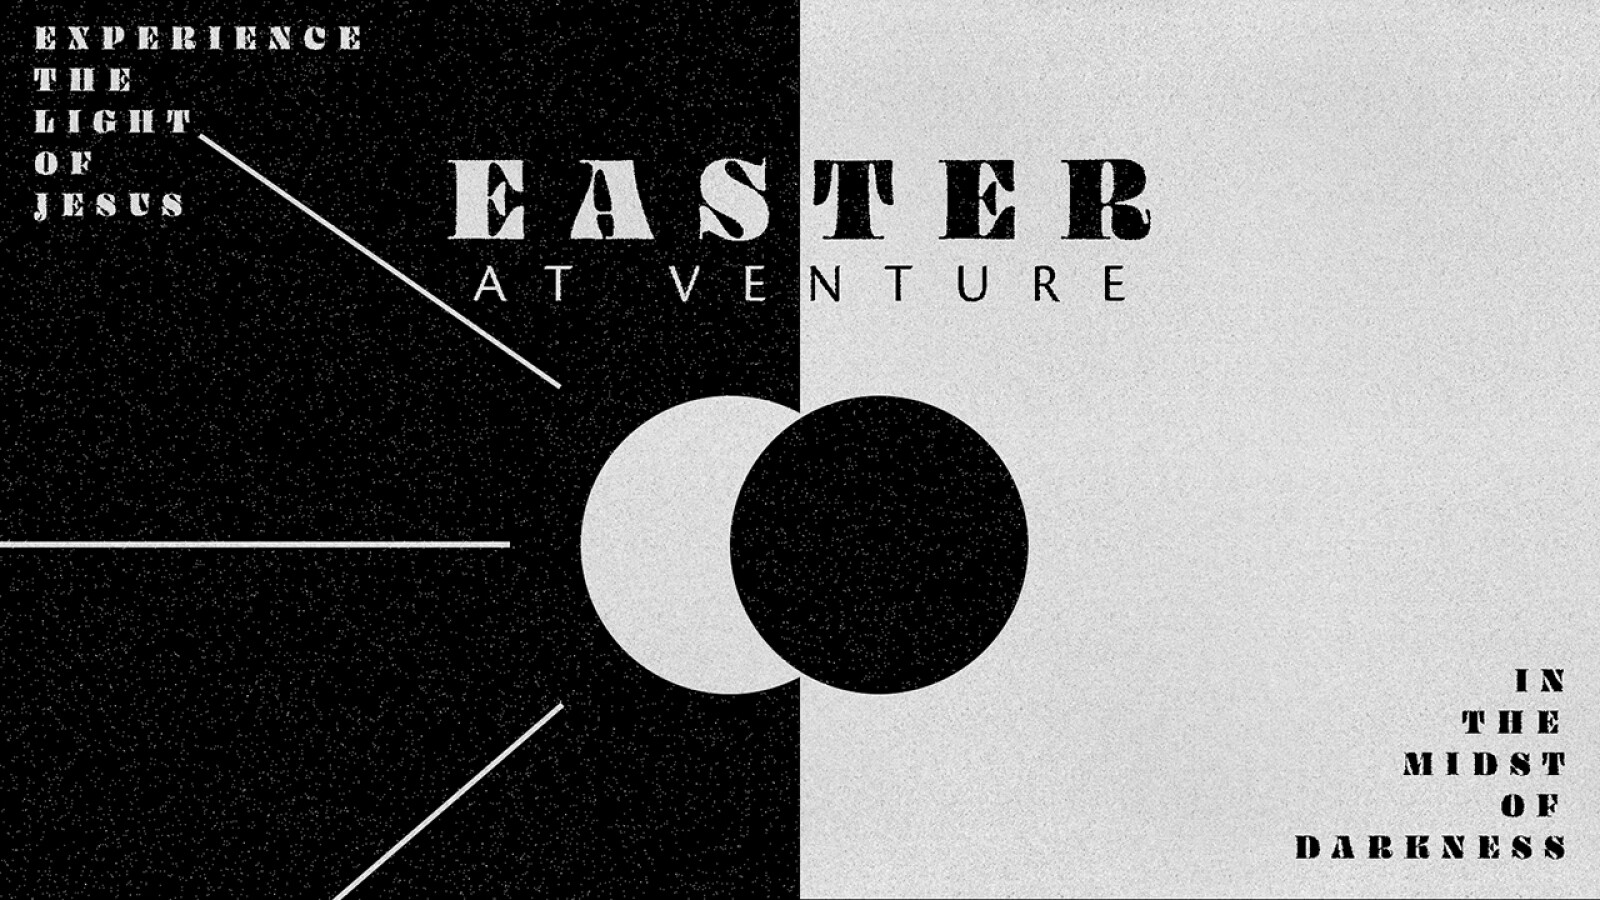 Easter at Venture